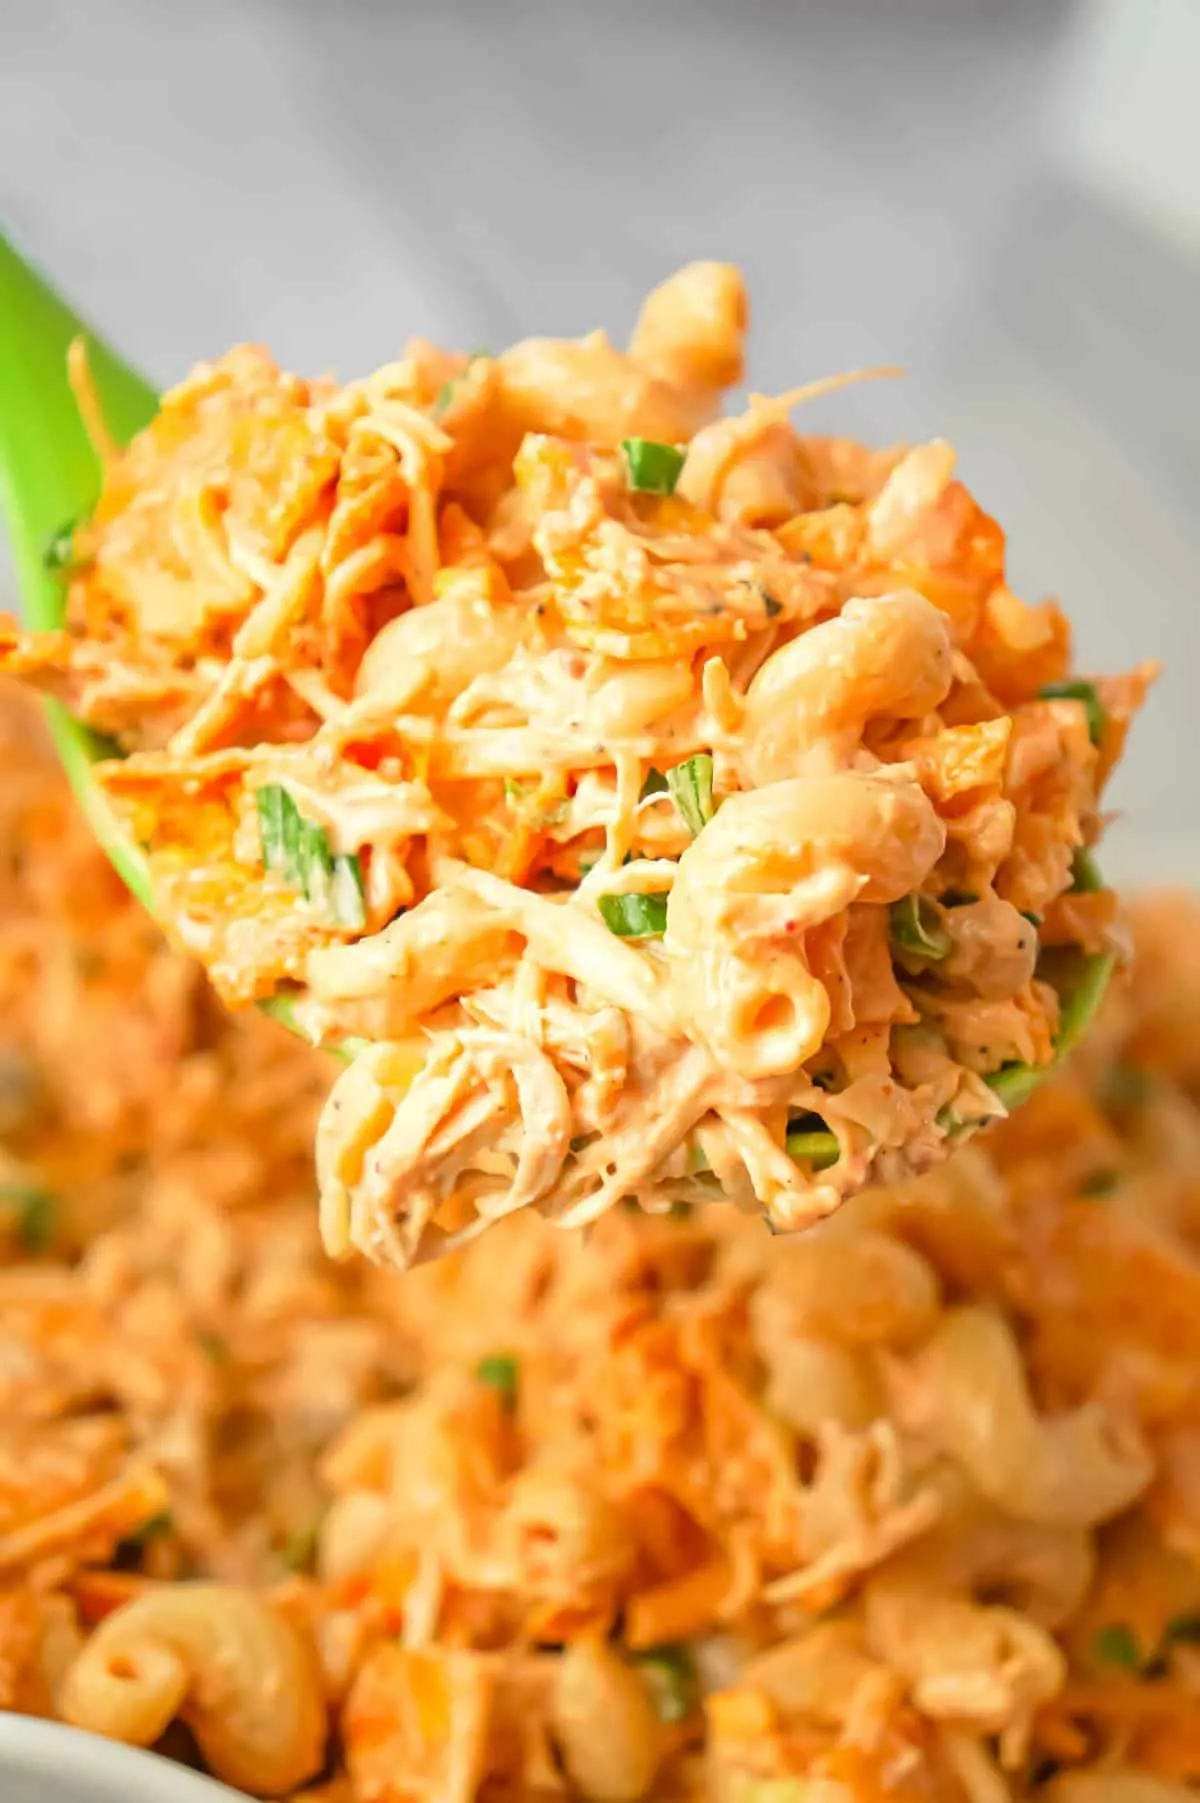 Doritos Chicken Pasta Salad is a tasty cold side dish recipe loaded with shredded chicken, chopped green onions, ranch dressing, salsa, shredded cheese and crumbled Doritos.